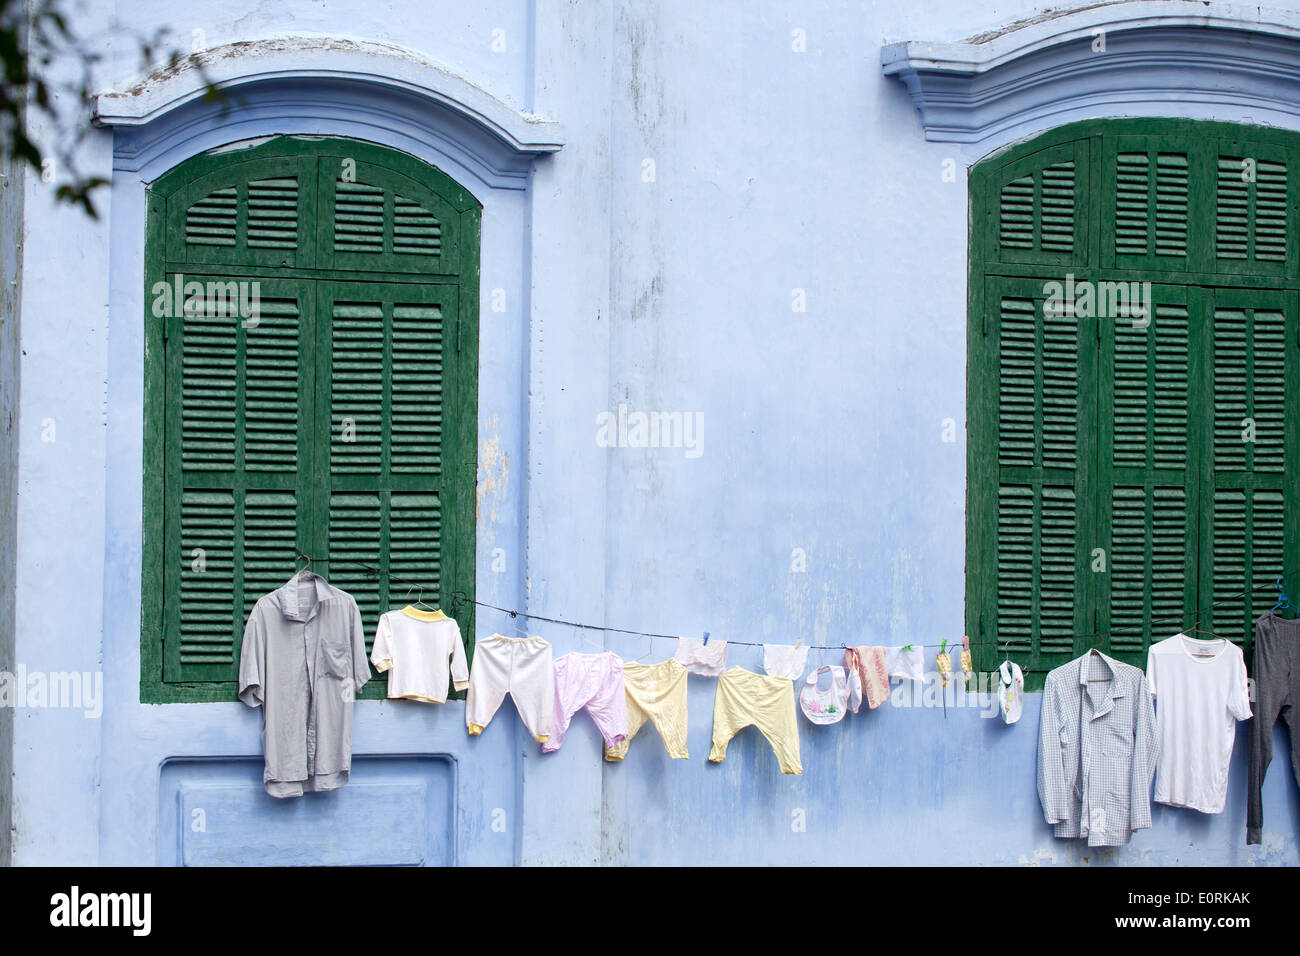 Clothes hanging out to dry on washing line in Hoi An Stock Photo